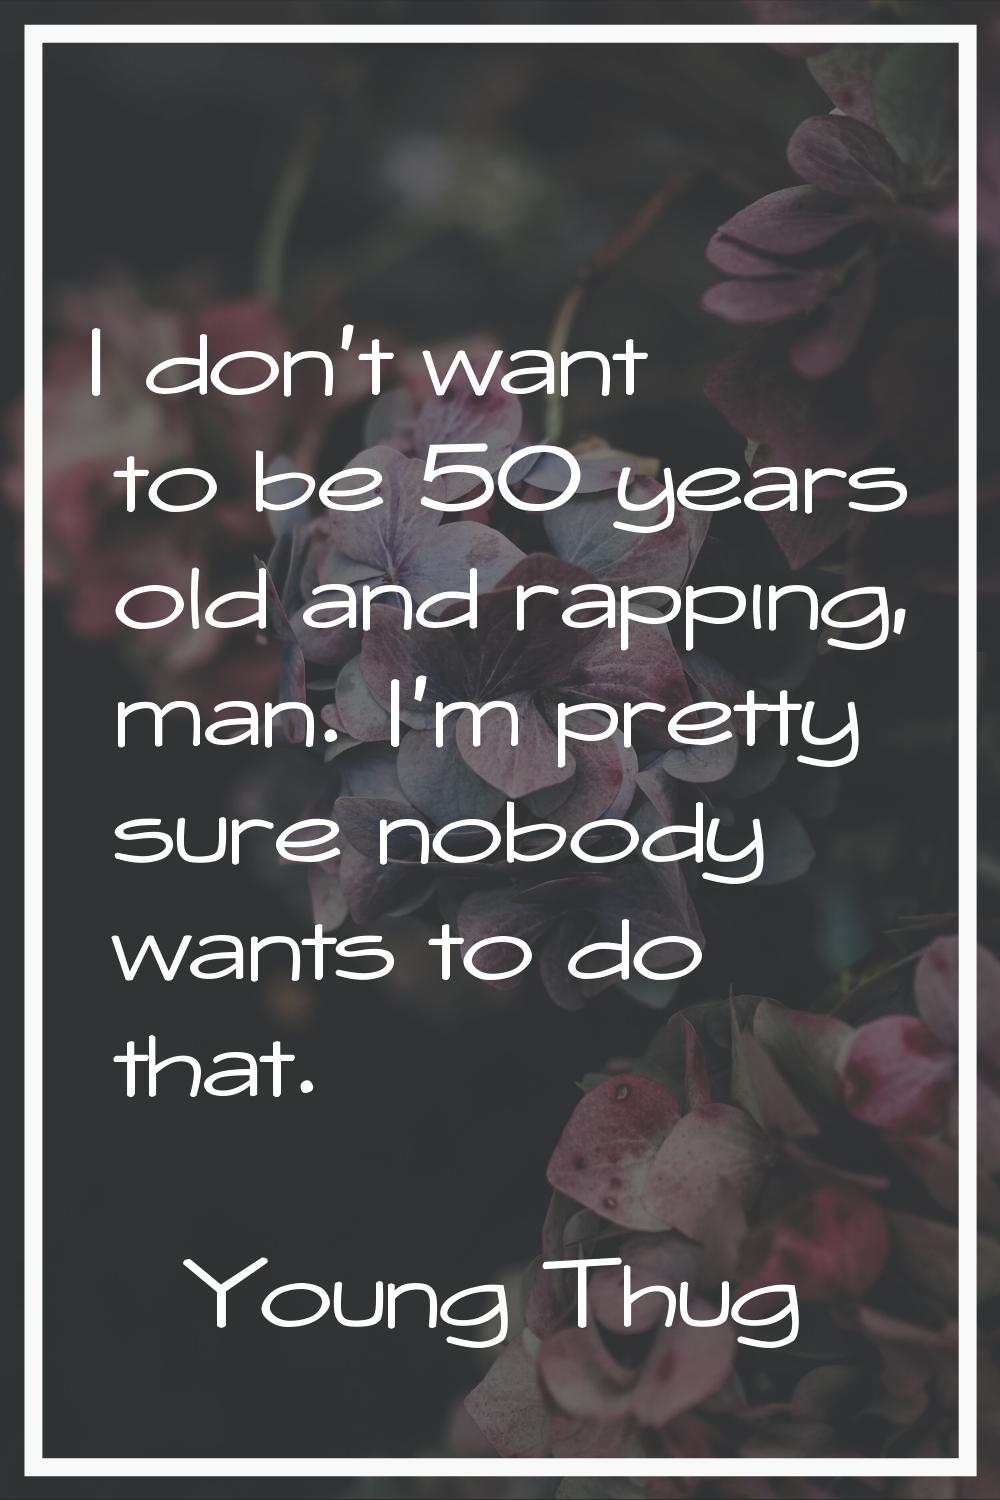 I don't want to be 50 years old and rapping, man. I'm pretty sure nobody wants to do that.